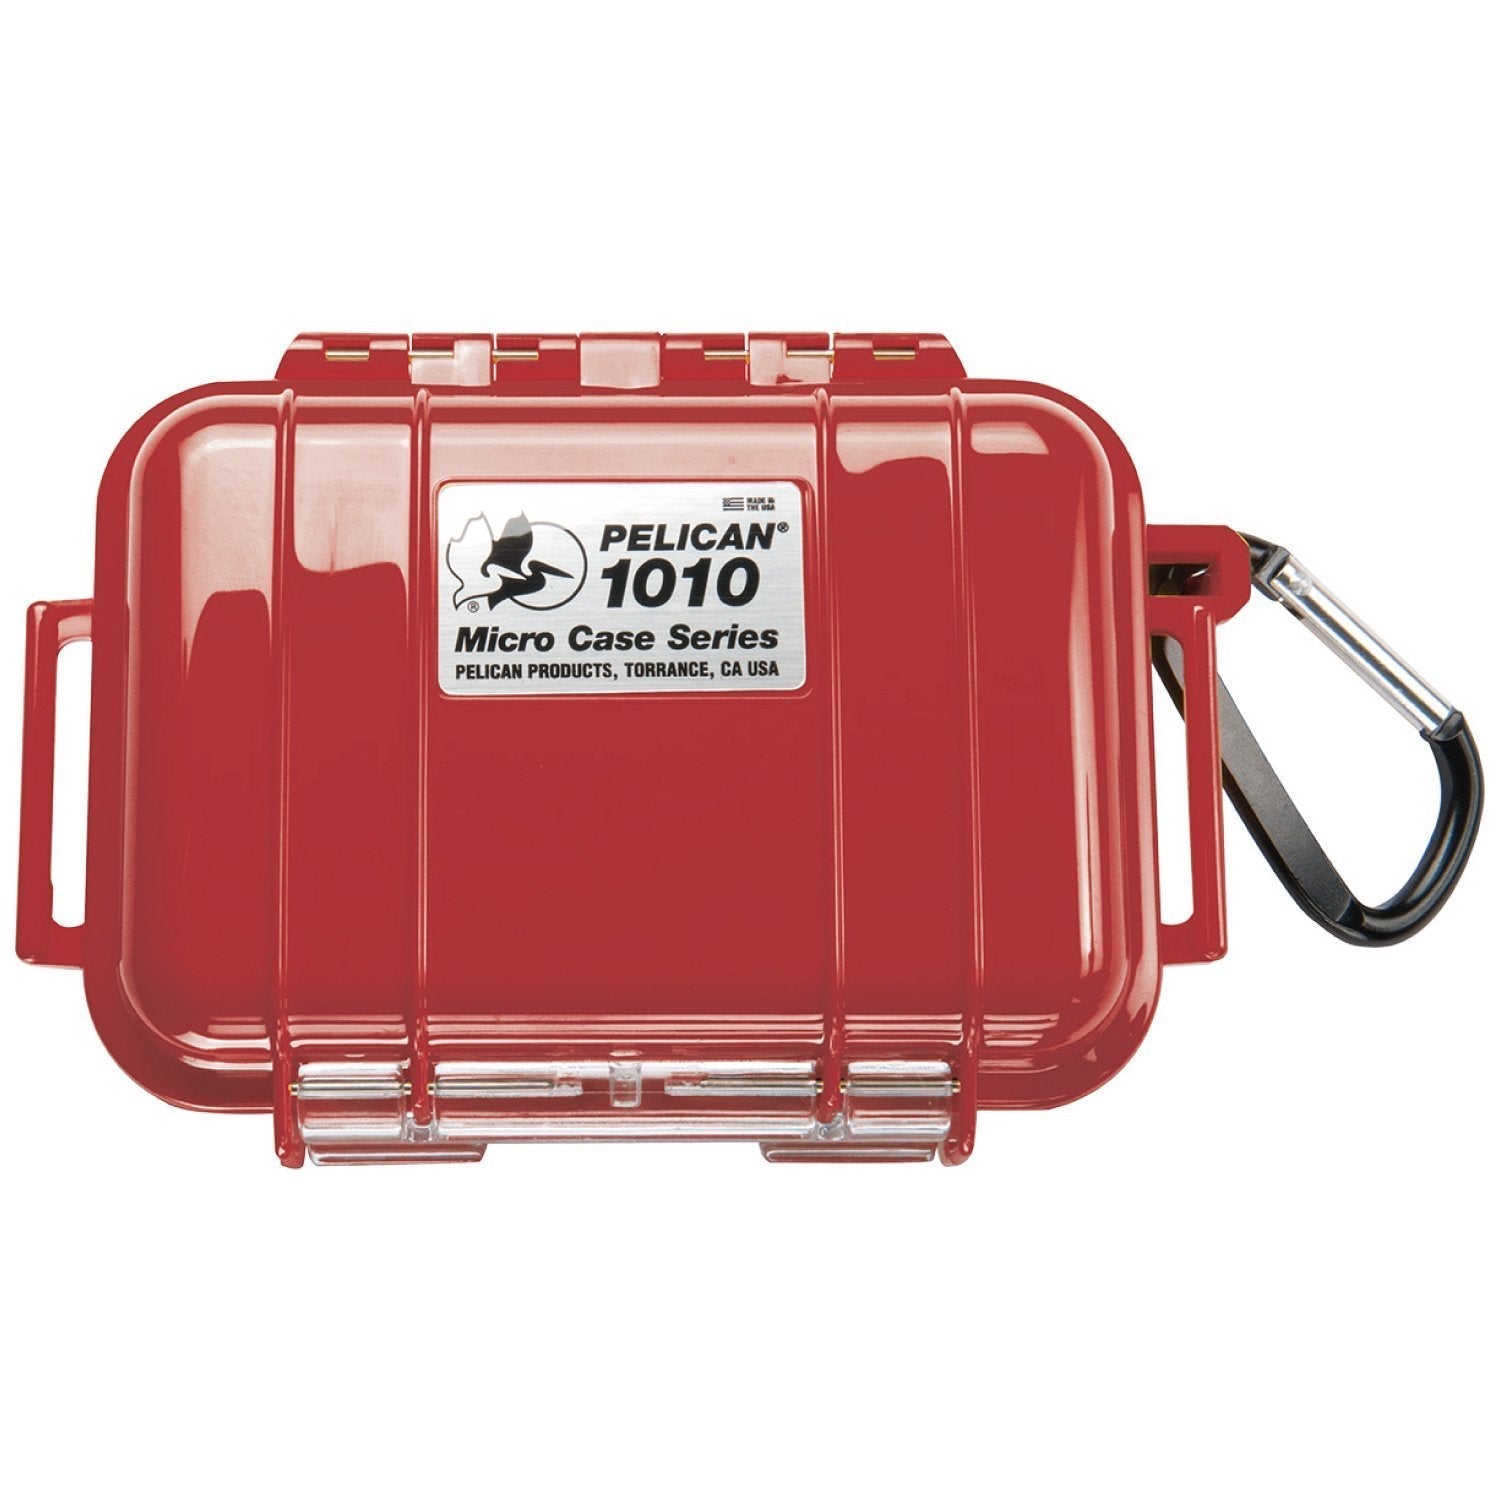 Pelican 1010 Micro Case Cases Pelican Products Red Shell with Black Liner Tactical Gear Supplier Tactical Distributors Australia